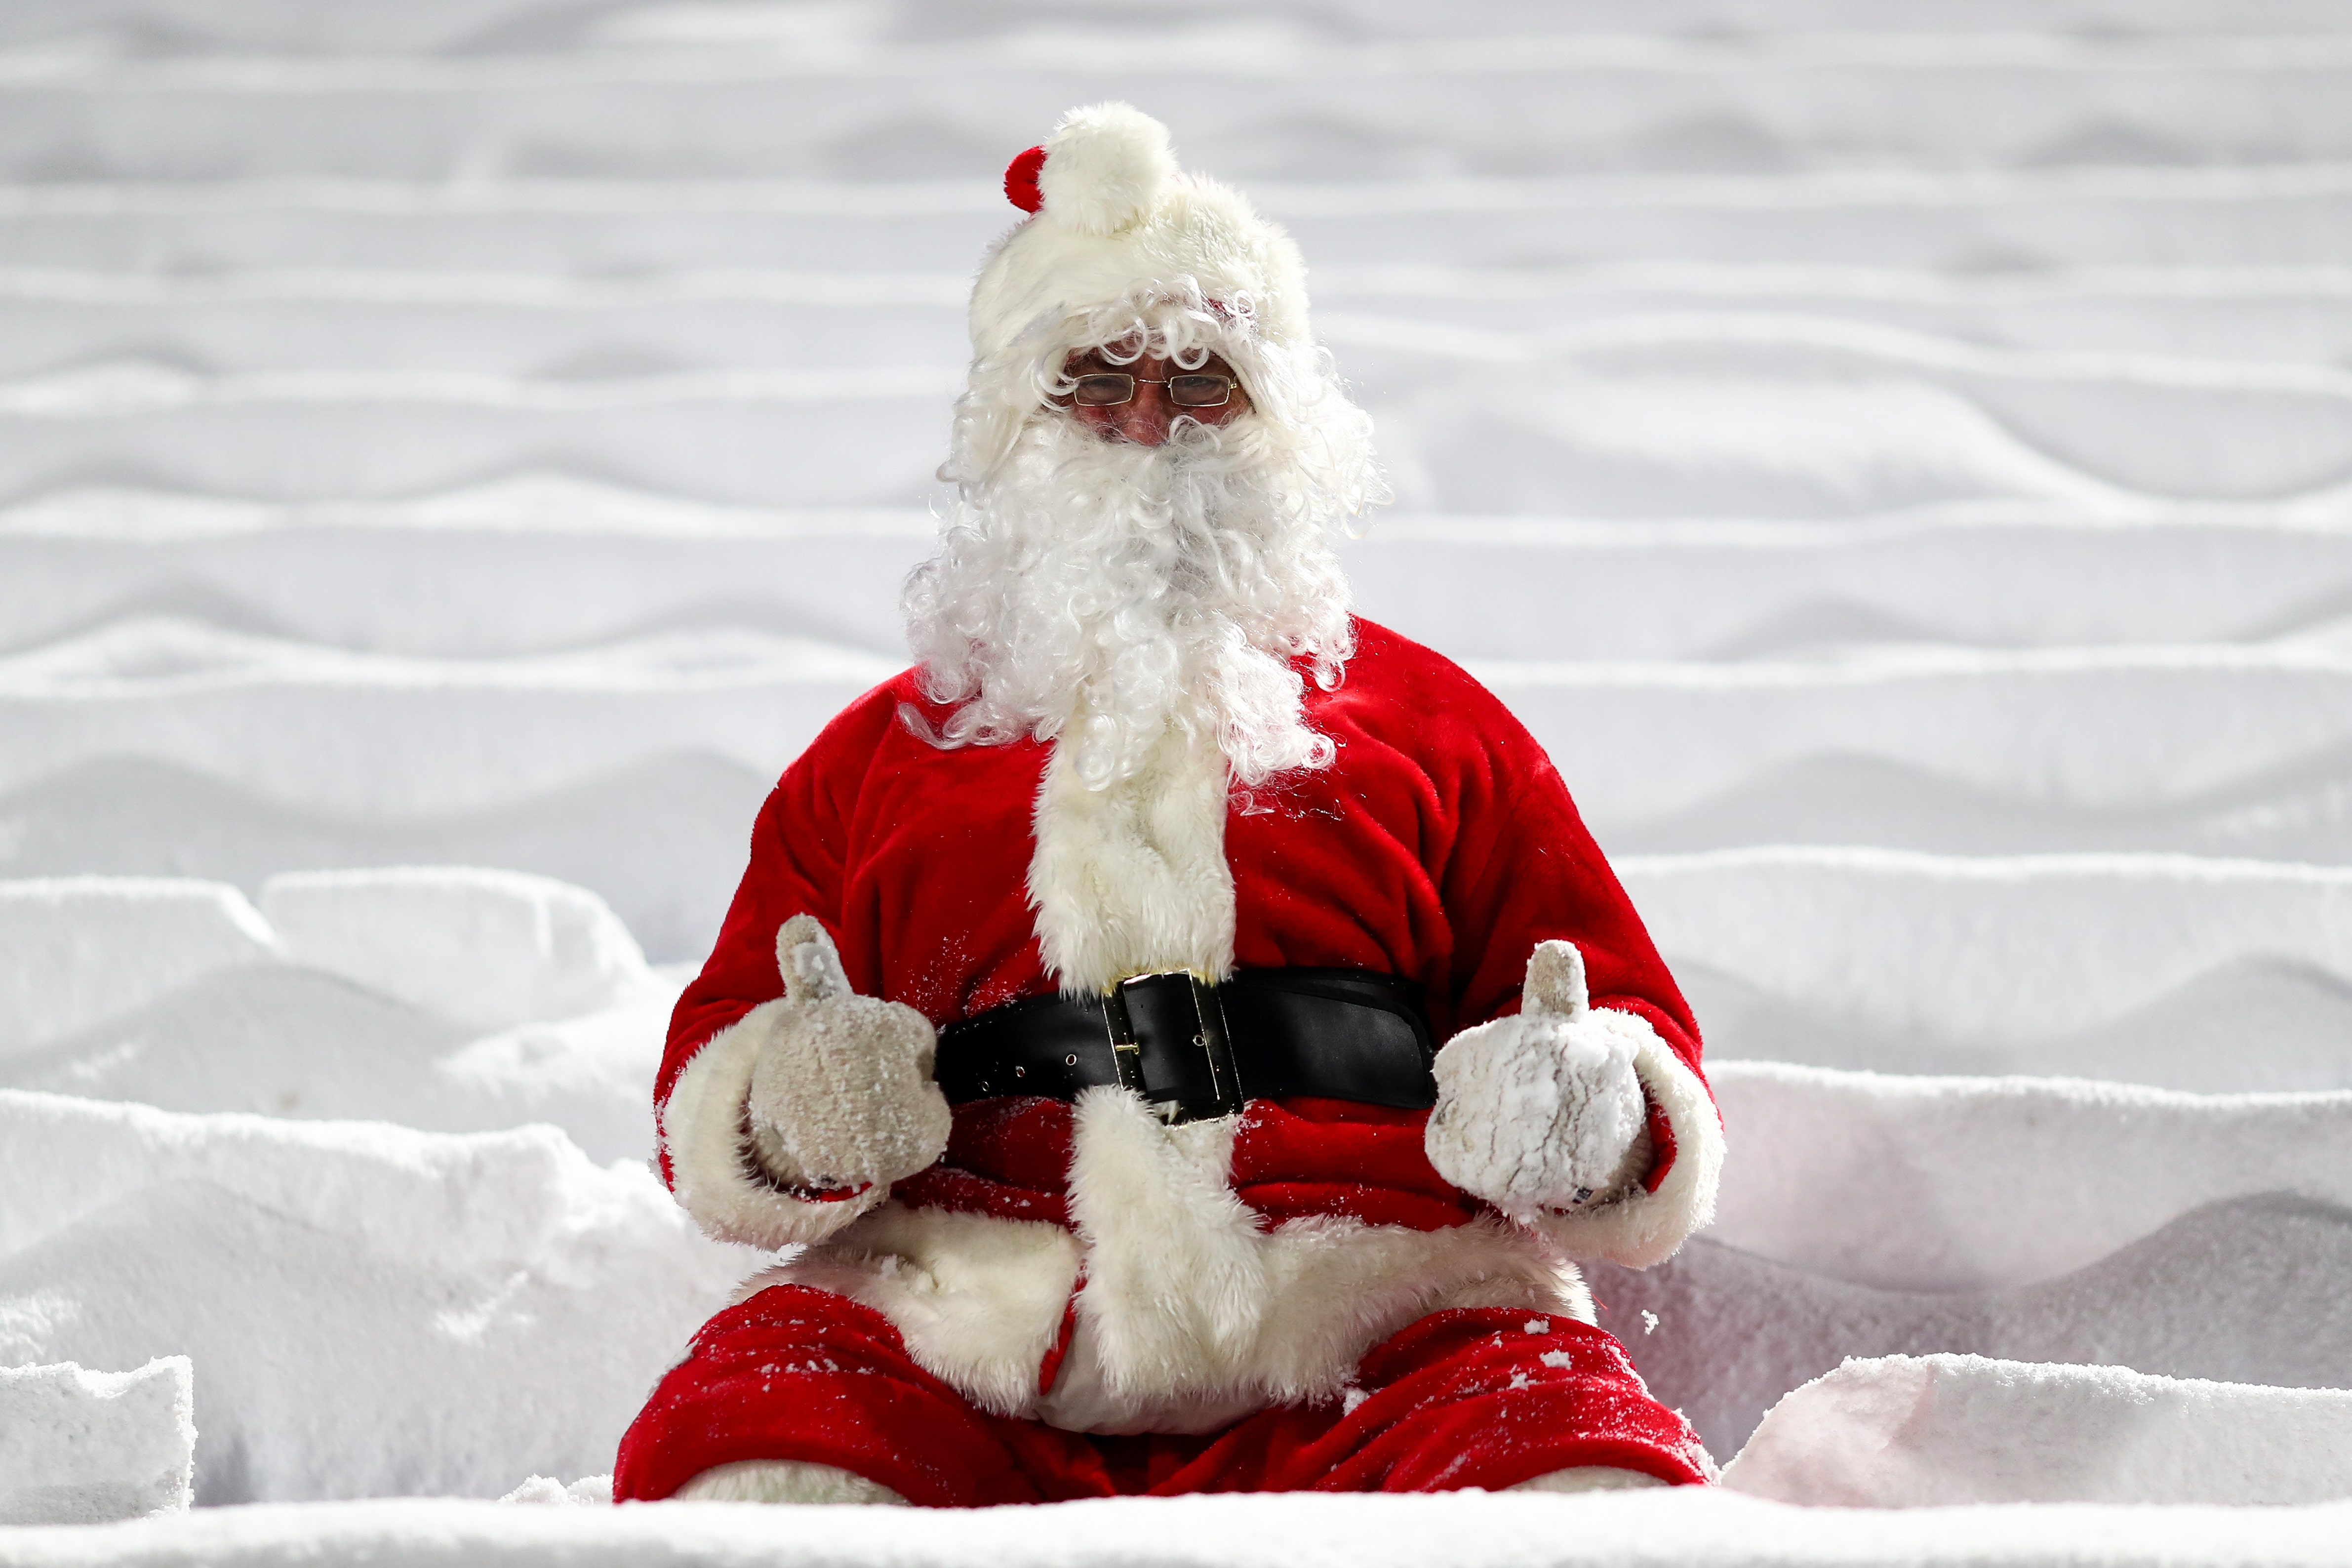 WATCH: See the display claiming to be the greatest Santa experience in the country